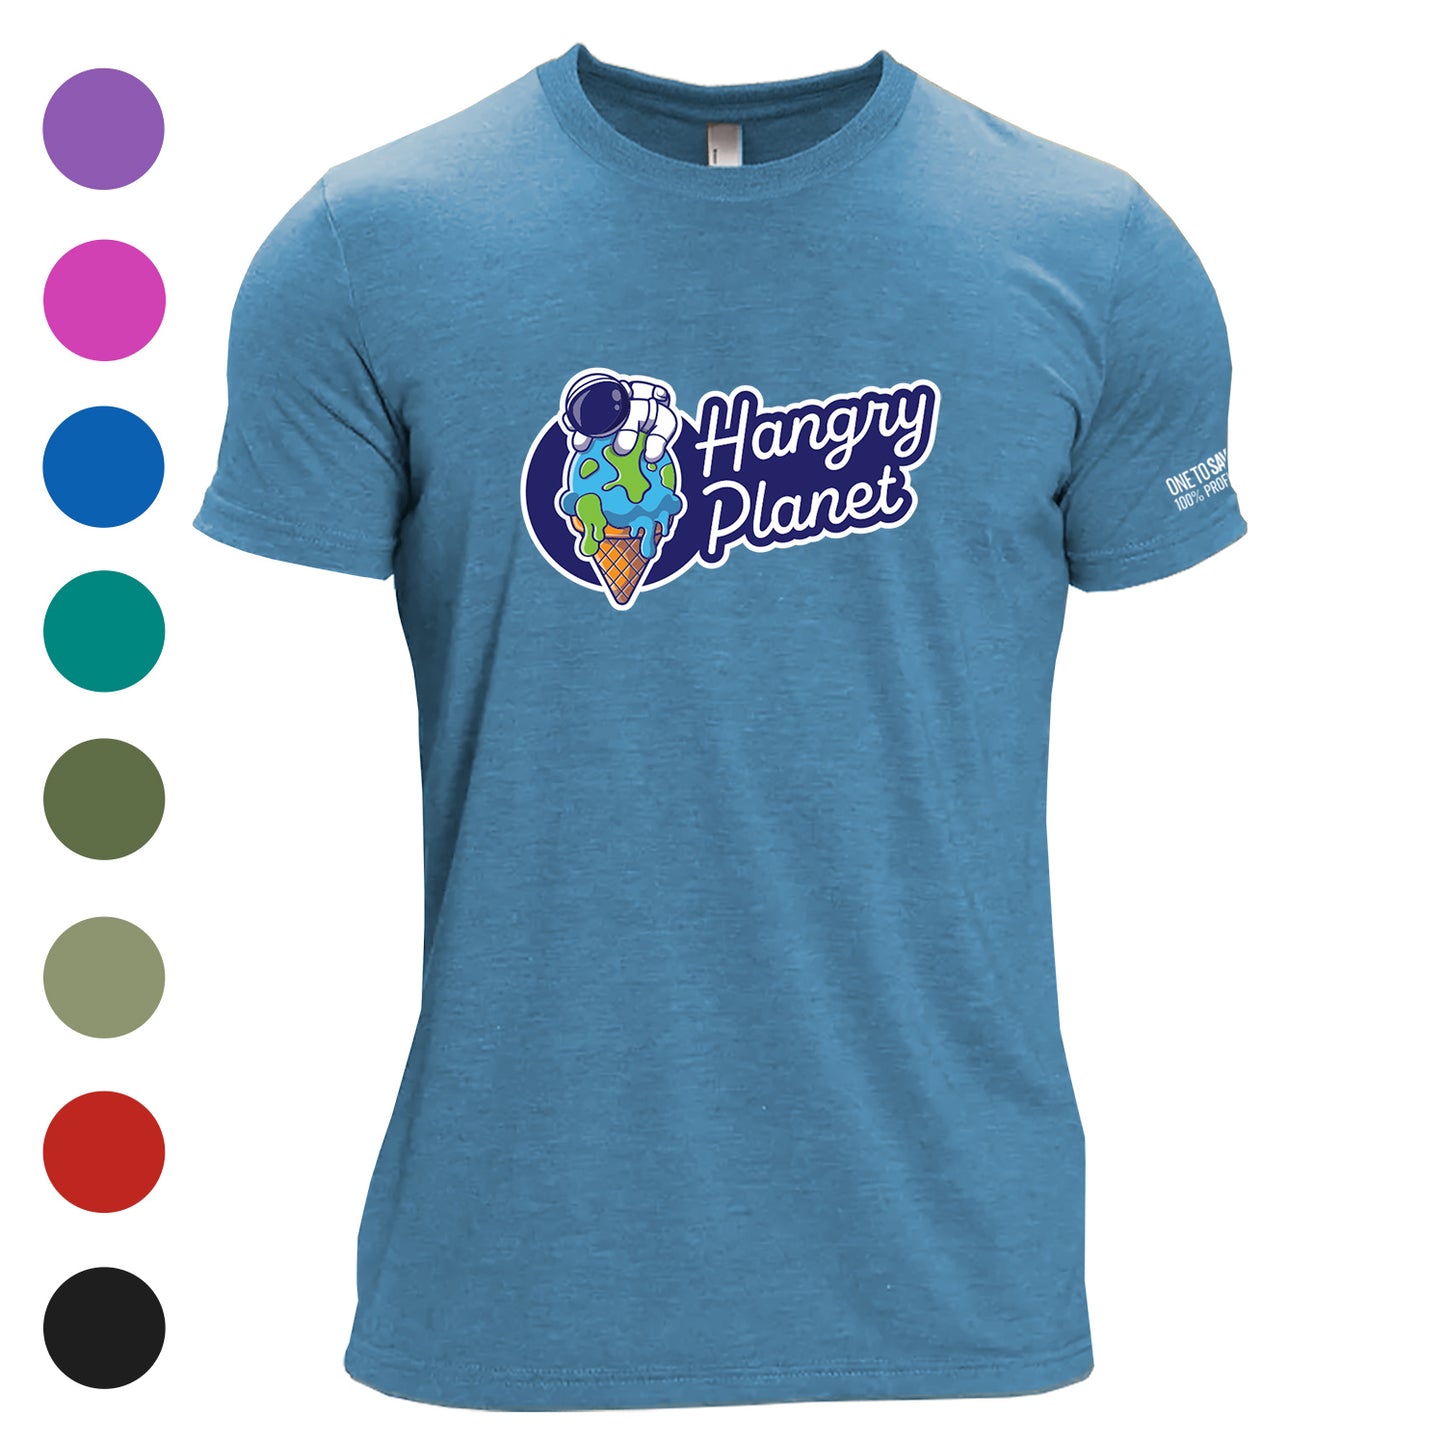 Hangry Planet Tri-Blend T-Shirt - Available in 9 Colors